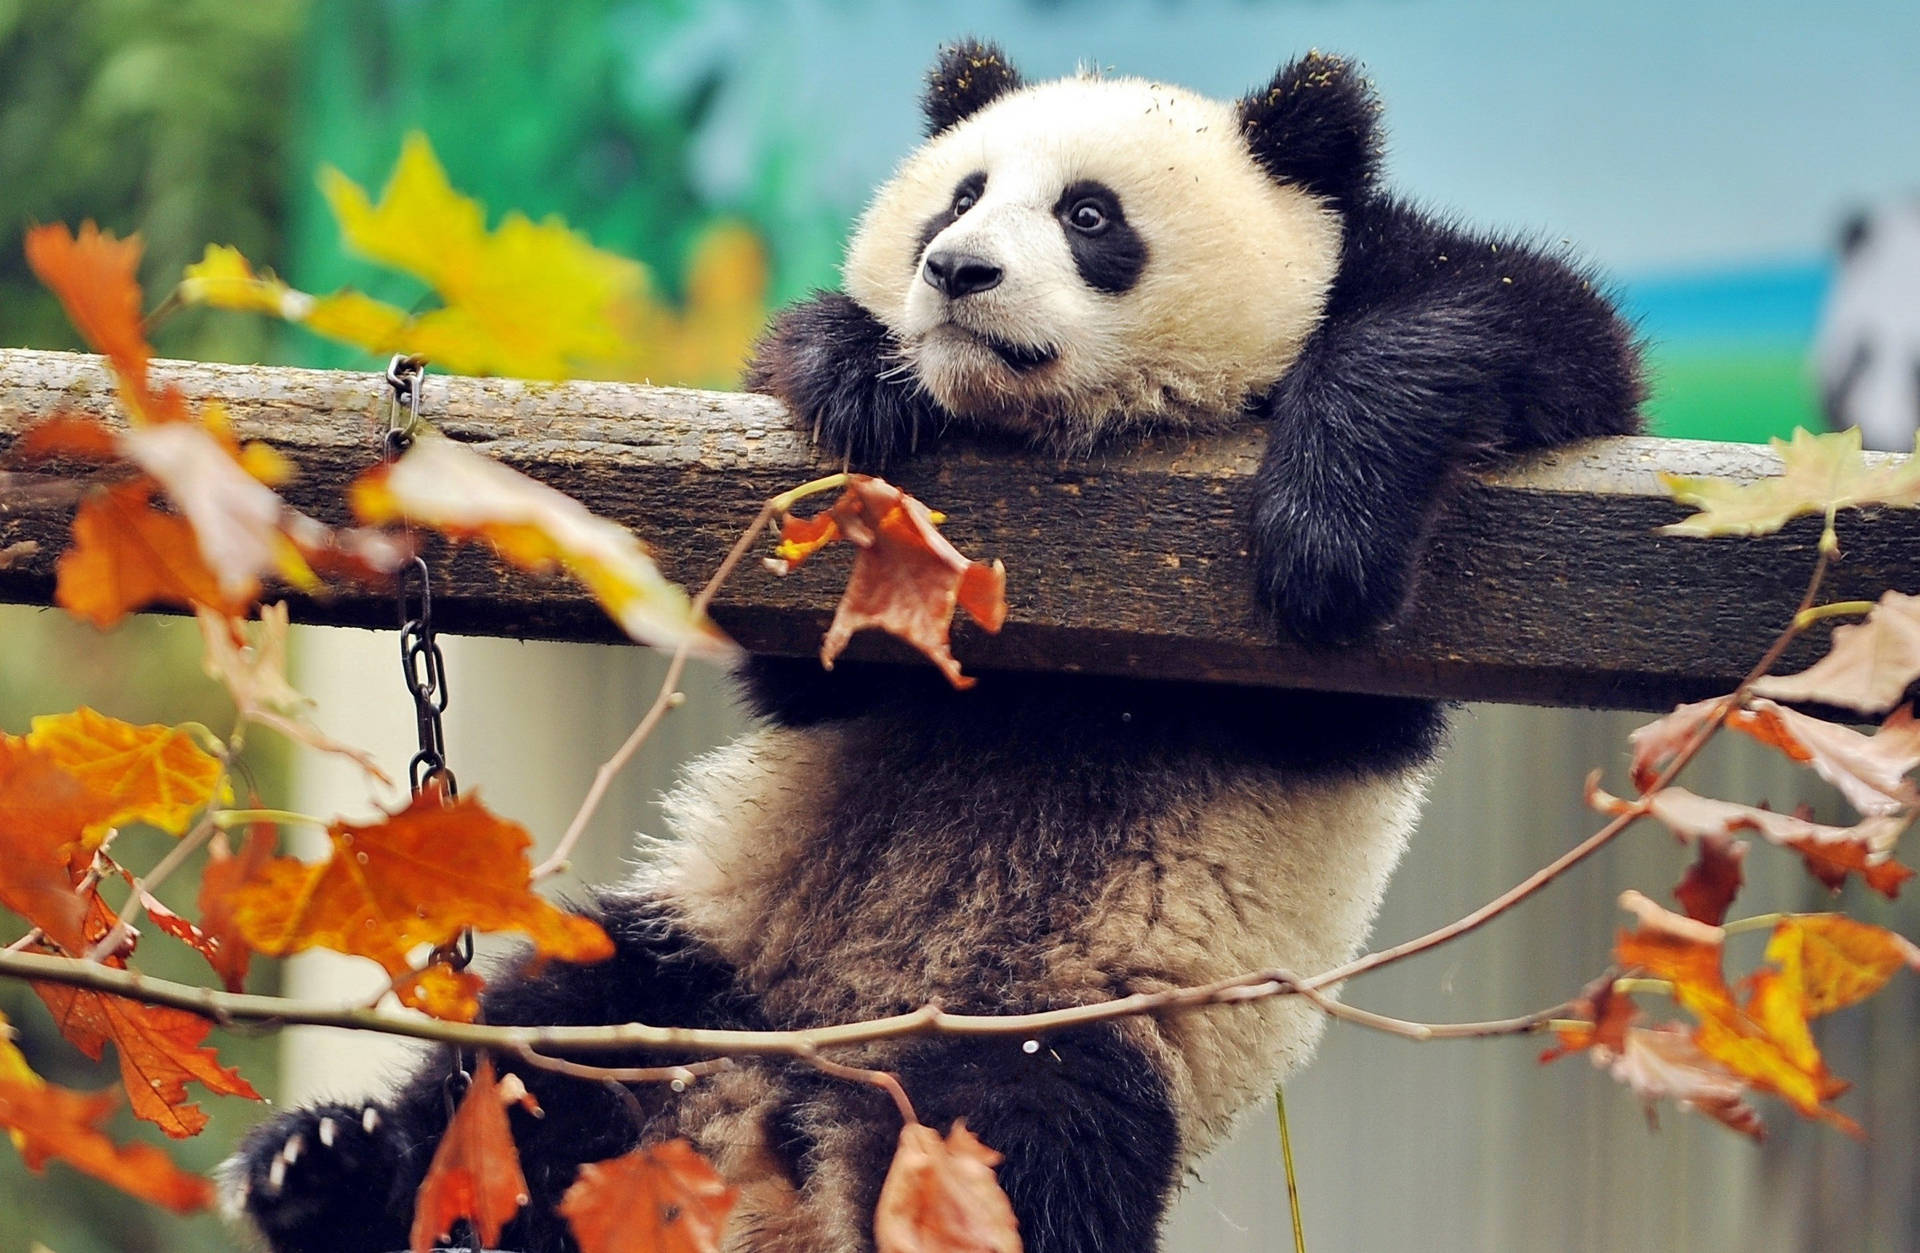 Cute Panda Hanging On A Wood Background